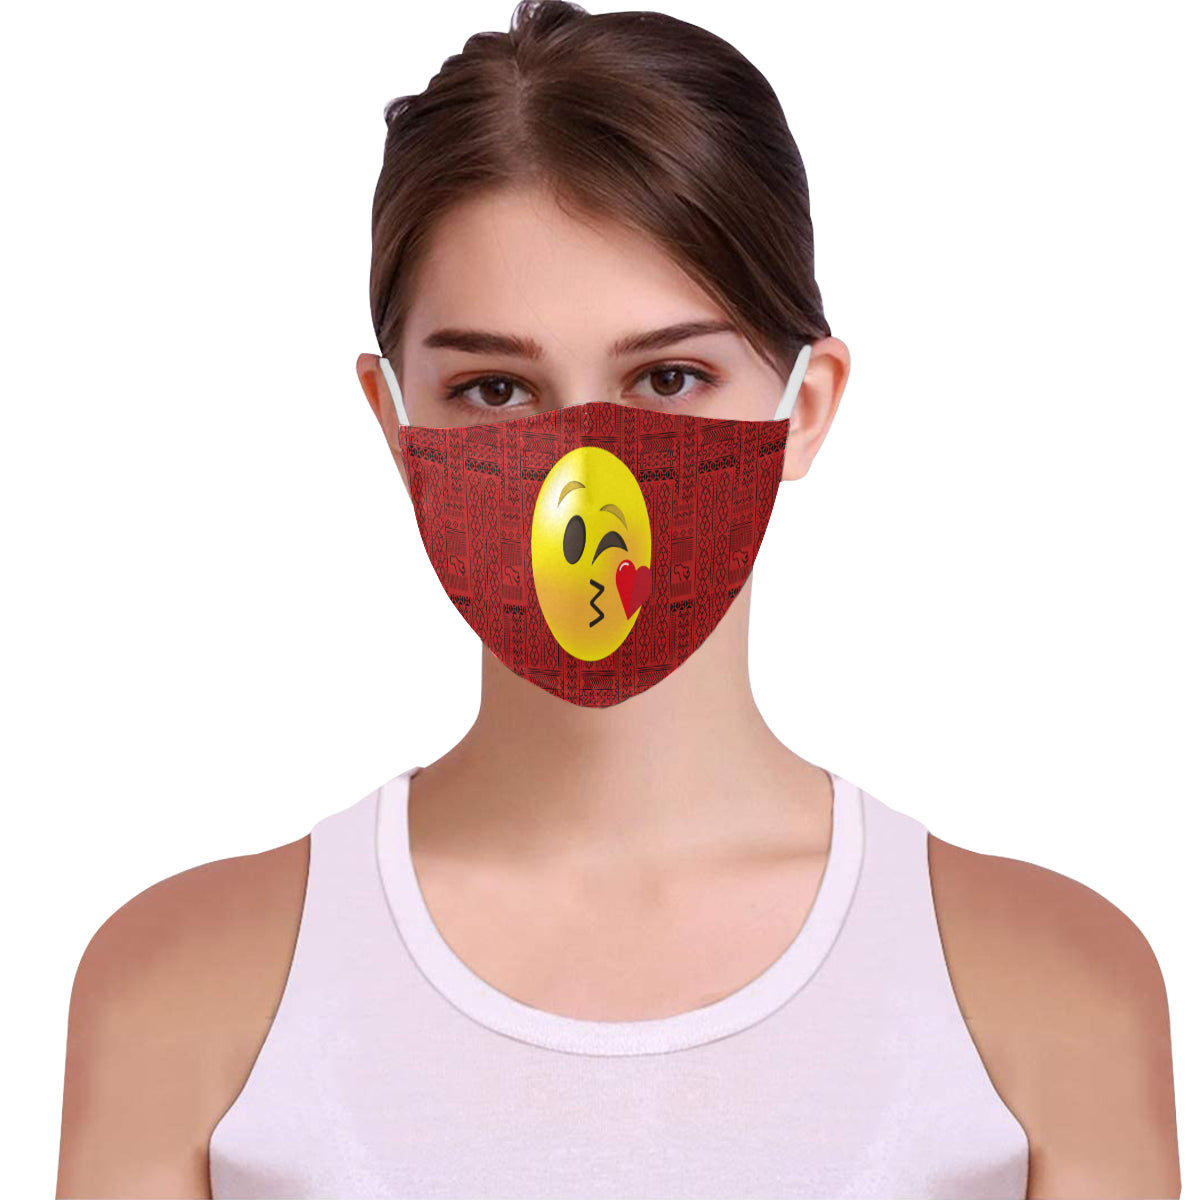 I Care! Tribal Print Emoji Cotton Fabric Face Mask with Filter Slot and Adjustable Strap - Non-medical use (2 Filters Included)